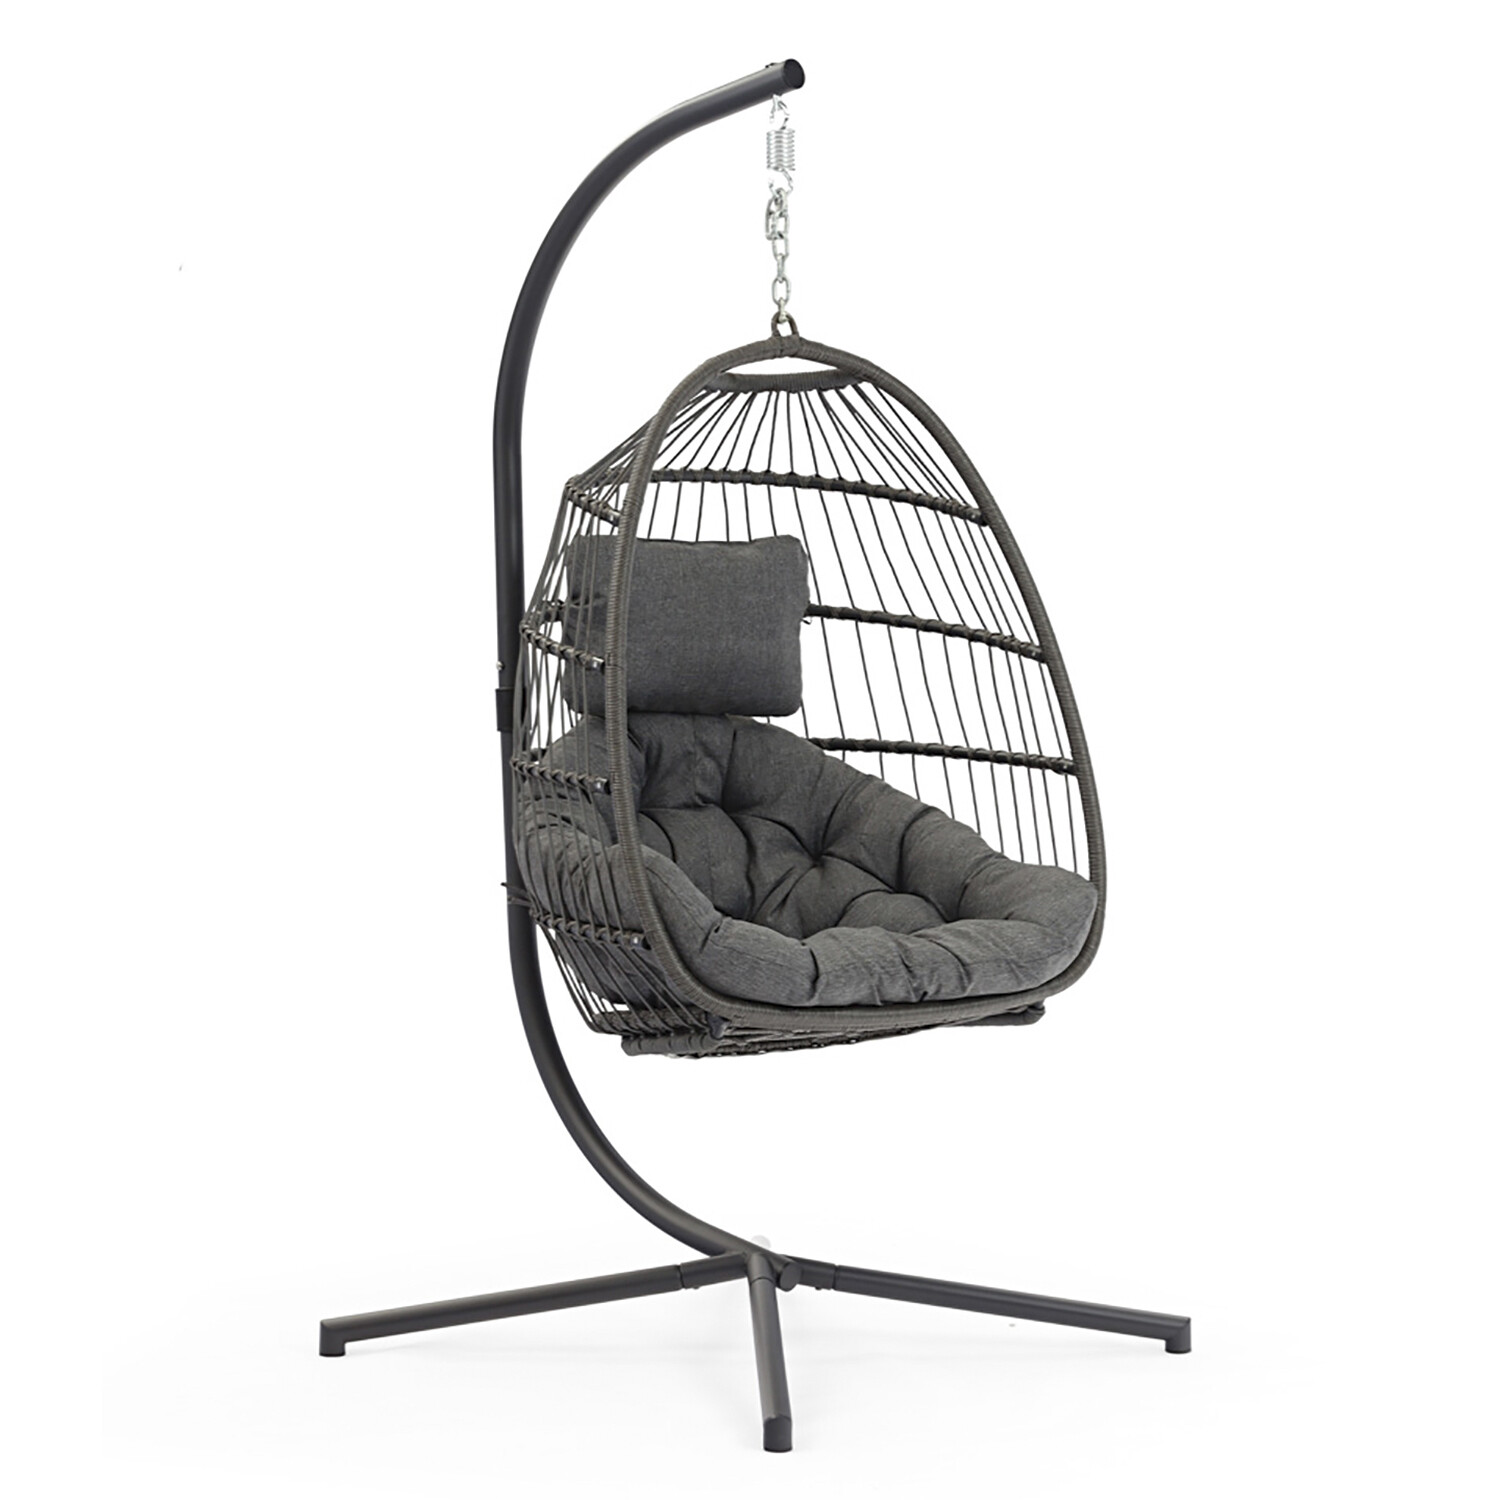 New Hampshire Dark Grey Foldable Hanging Egg Chair with Cushions Image 6